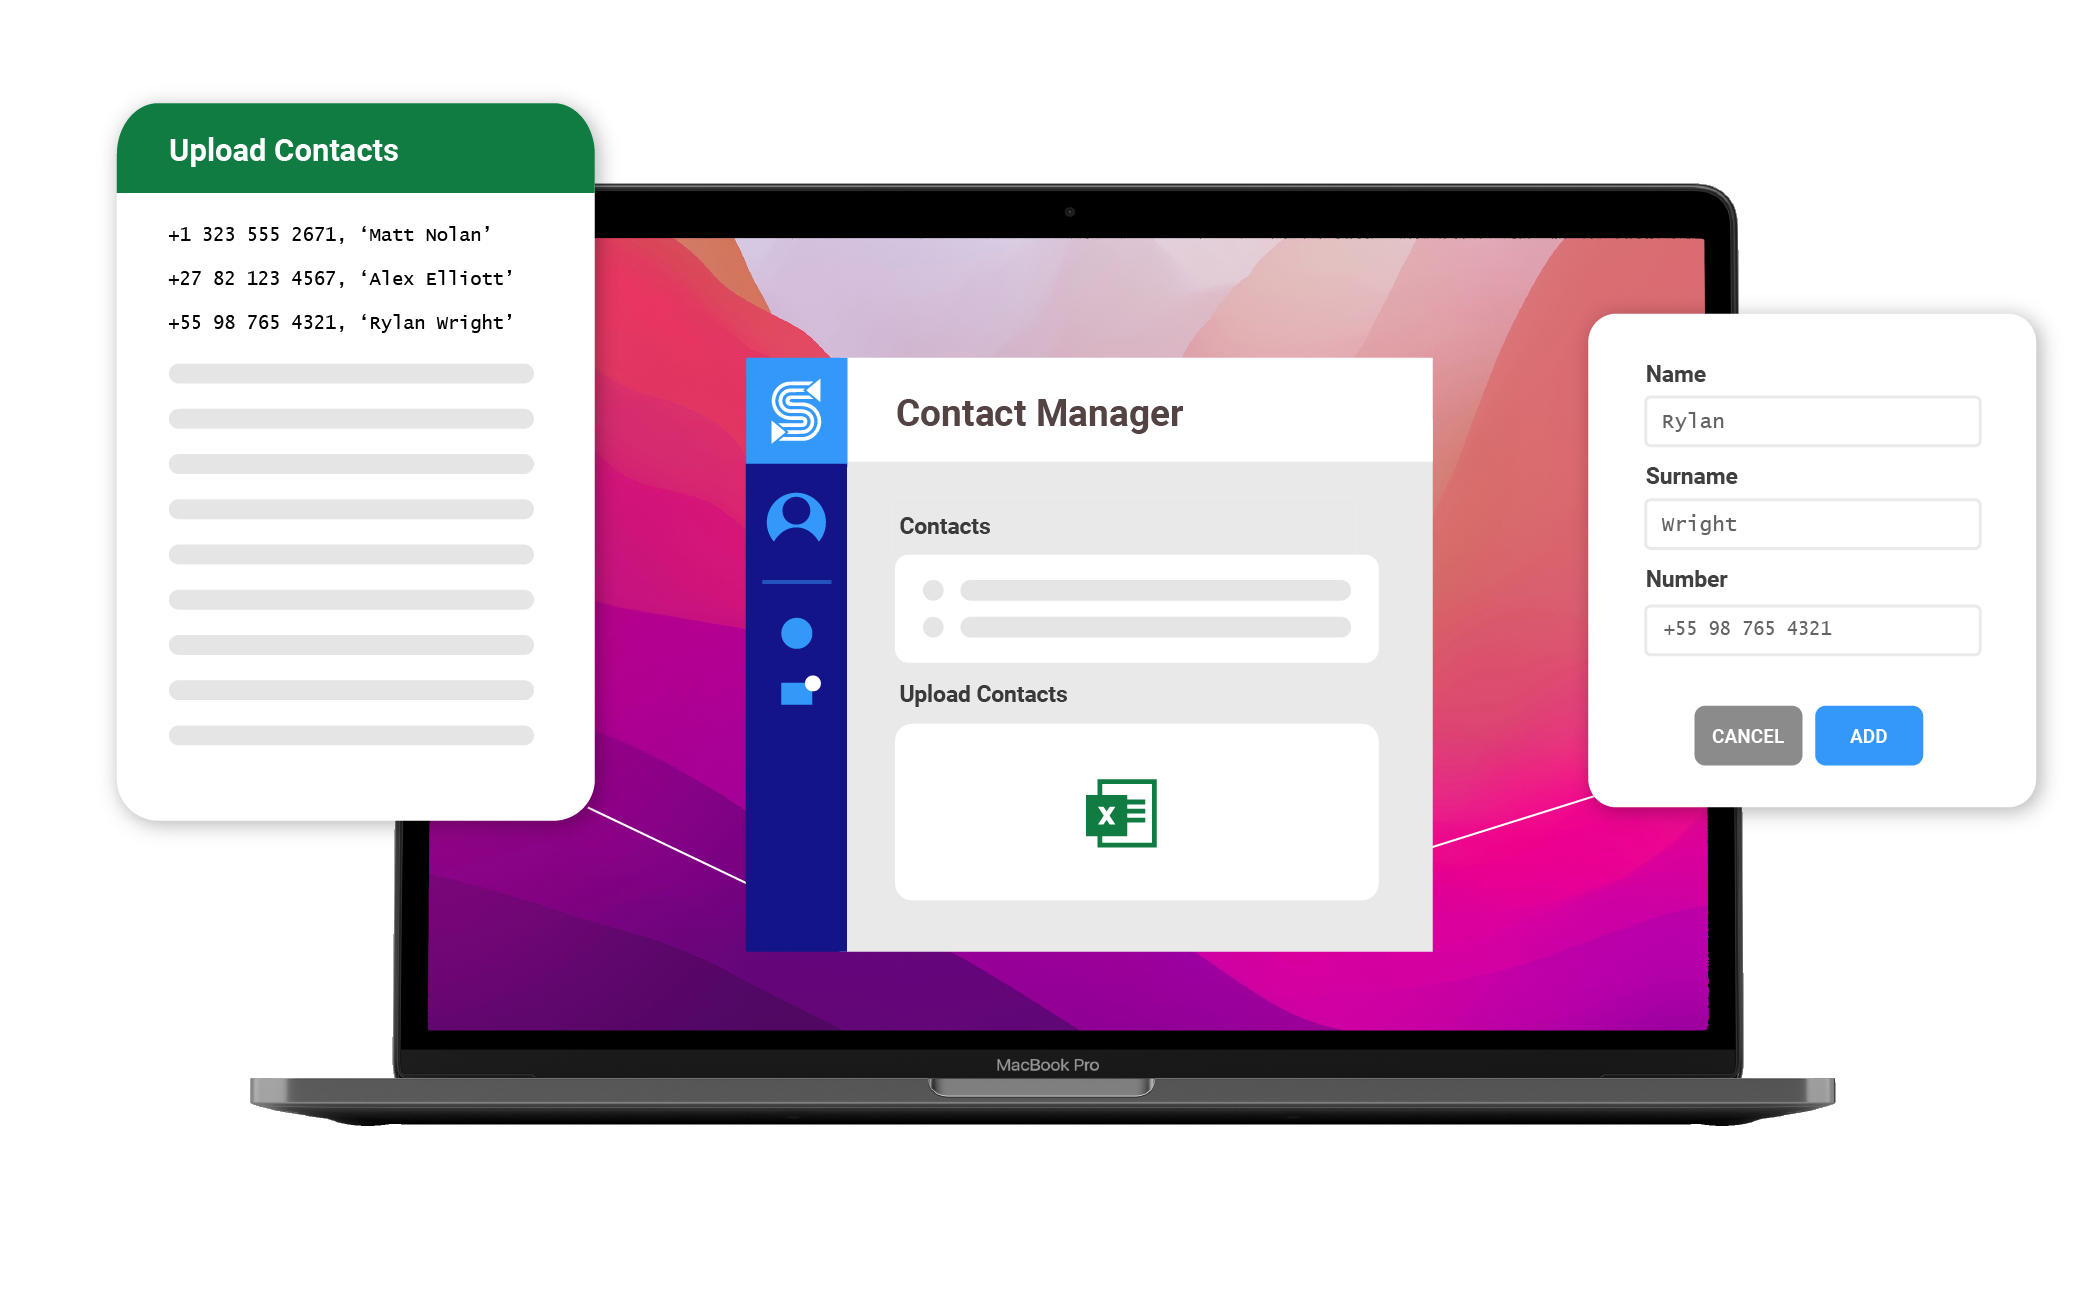 Upload Your Contacts: Add contacts in just a few clicks with our easy to use import feature. Simply upload your .CSV from a spreadsheet like Excel or add them directly into the contacts manager.